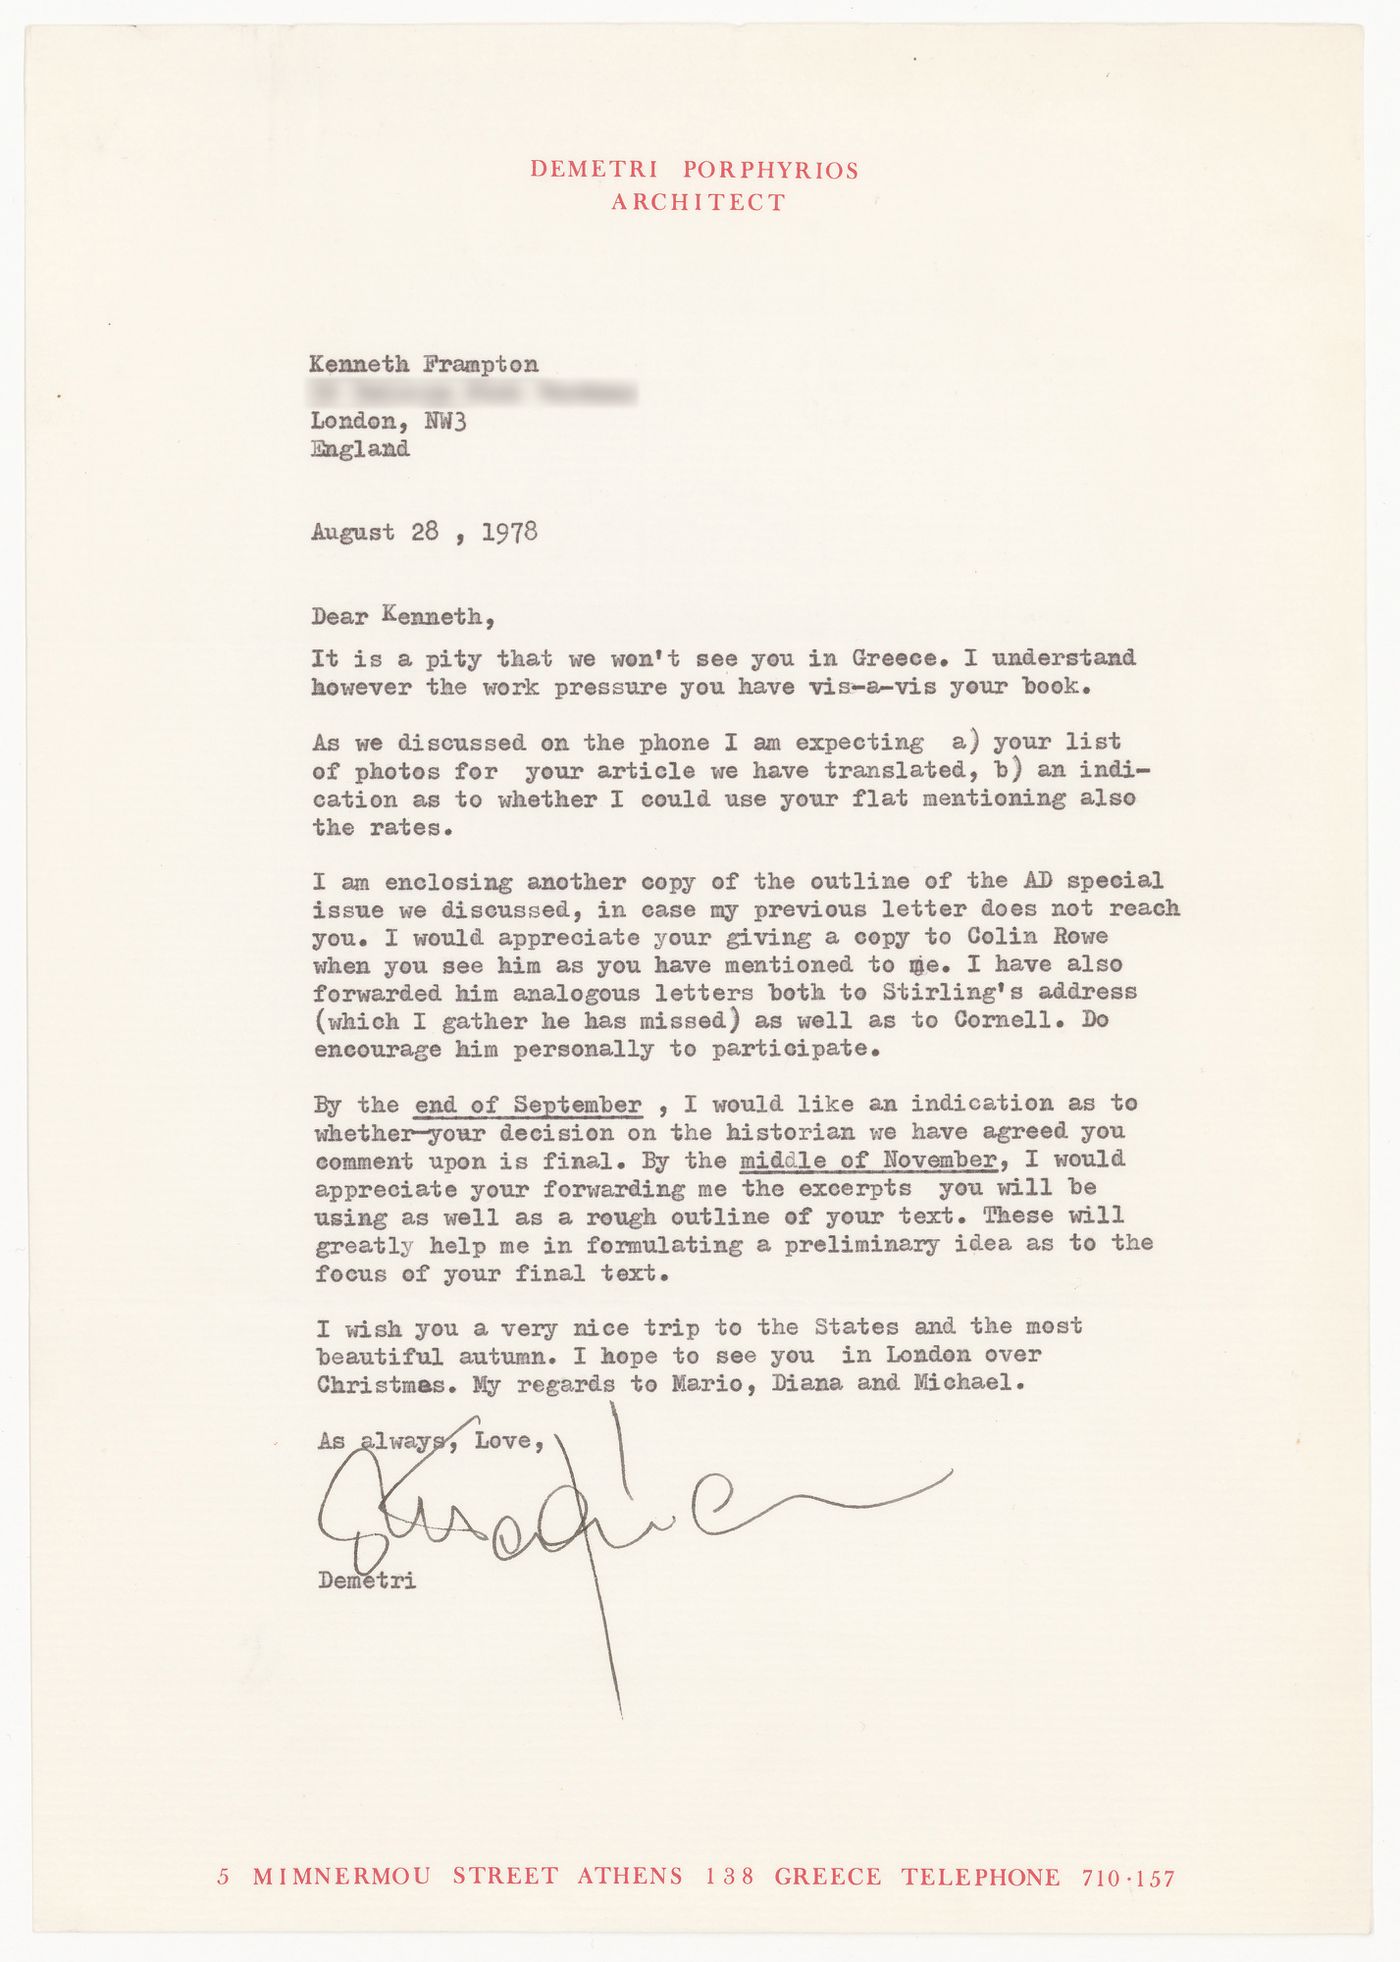 Letter from Demetri Porphyrios to Kenneth Frampton with a copy of the outline of Architectural Design special issue on the methodology of architectural history